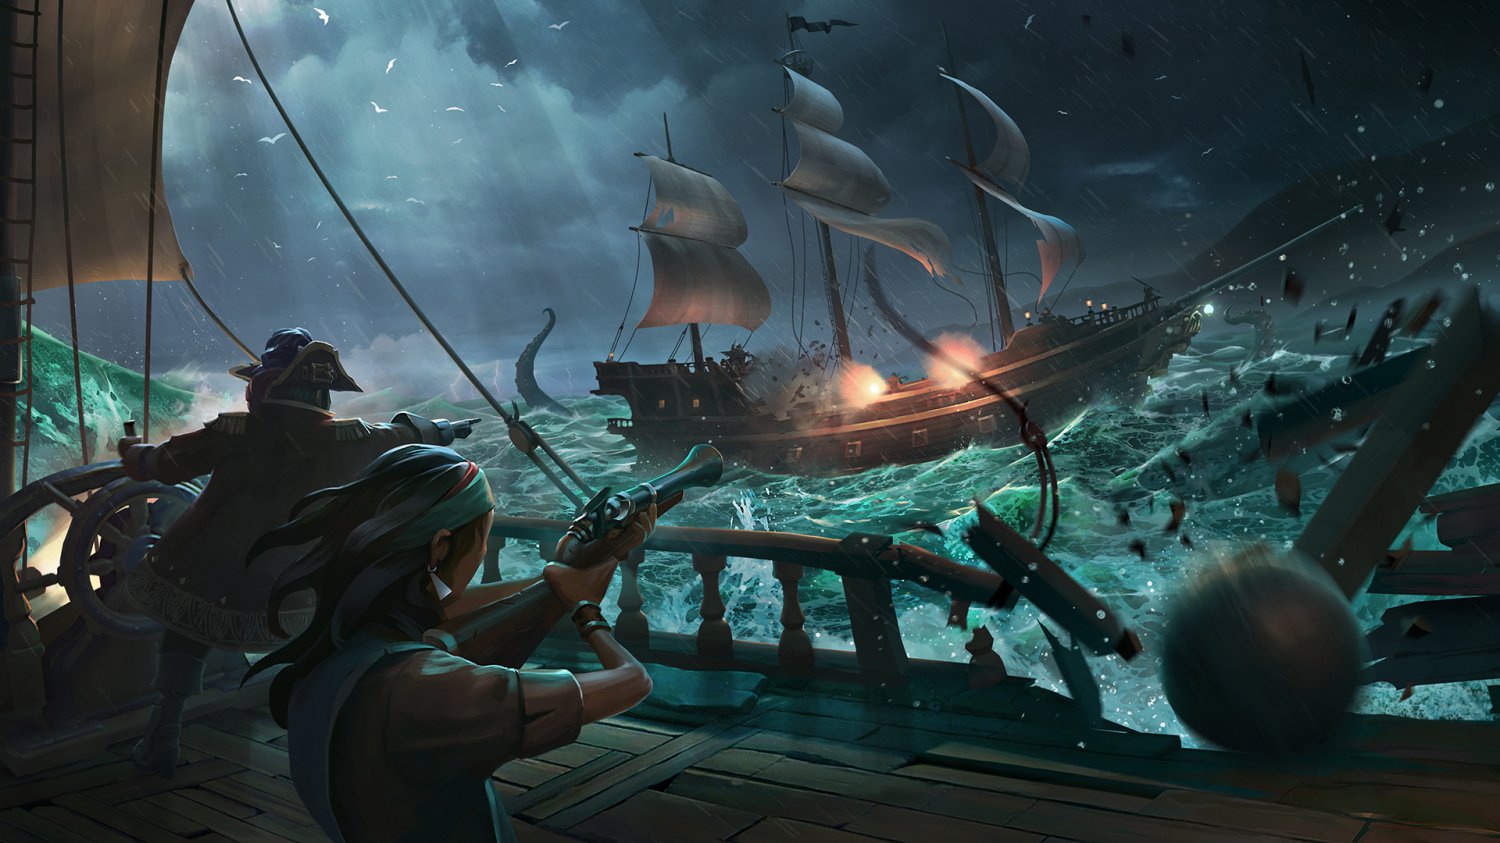 Sea of Thieves Game 13"x19" (32cm/49cm) Polyester Fabric Poster